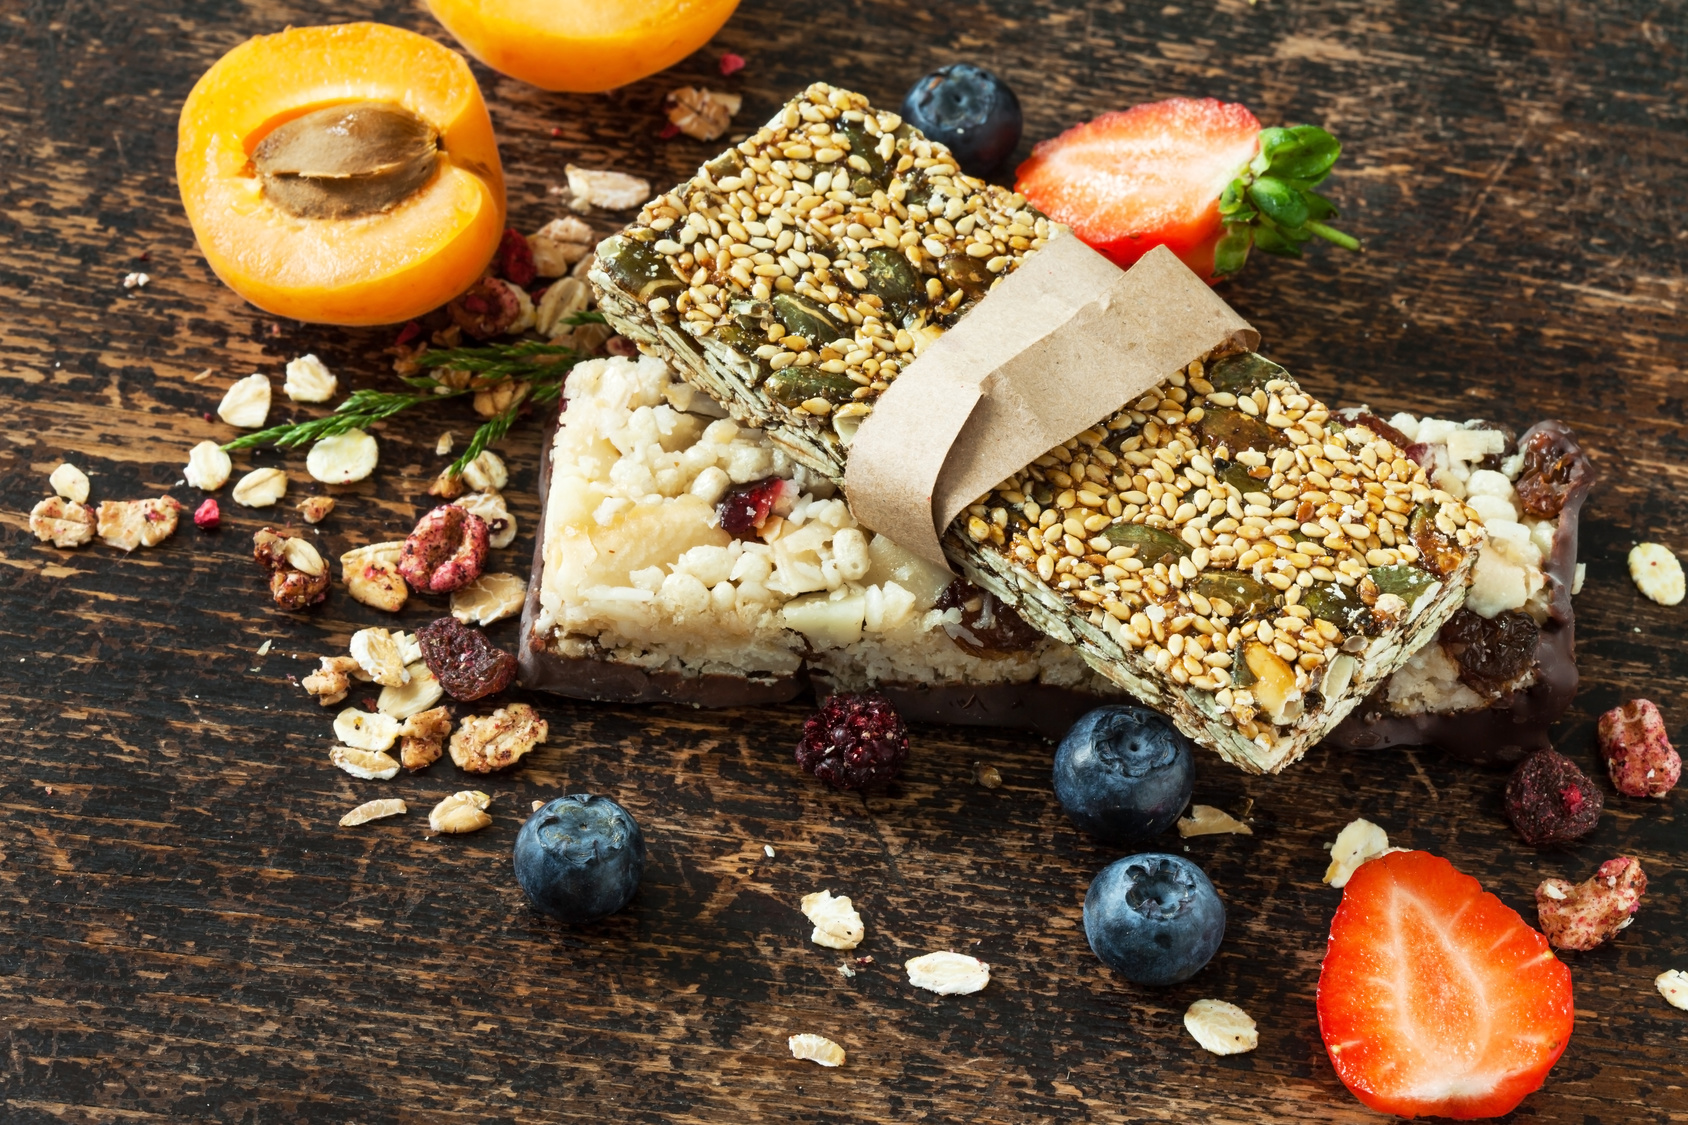 Wedding Photographer Tips: 8 Healthy Snacks To Pack For Long Shooting Days